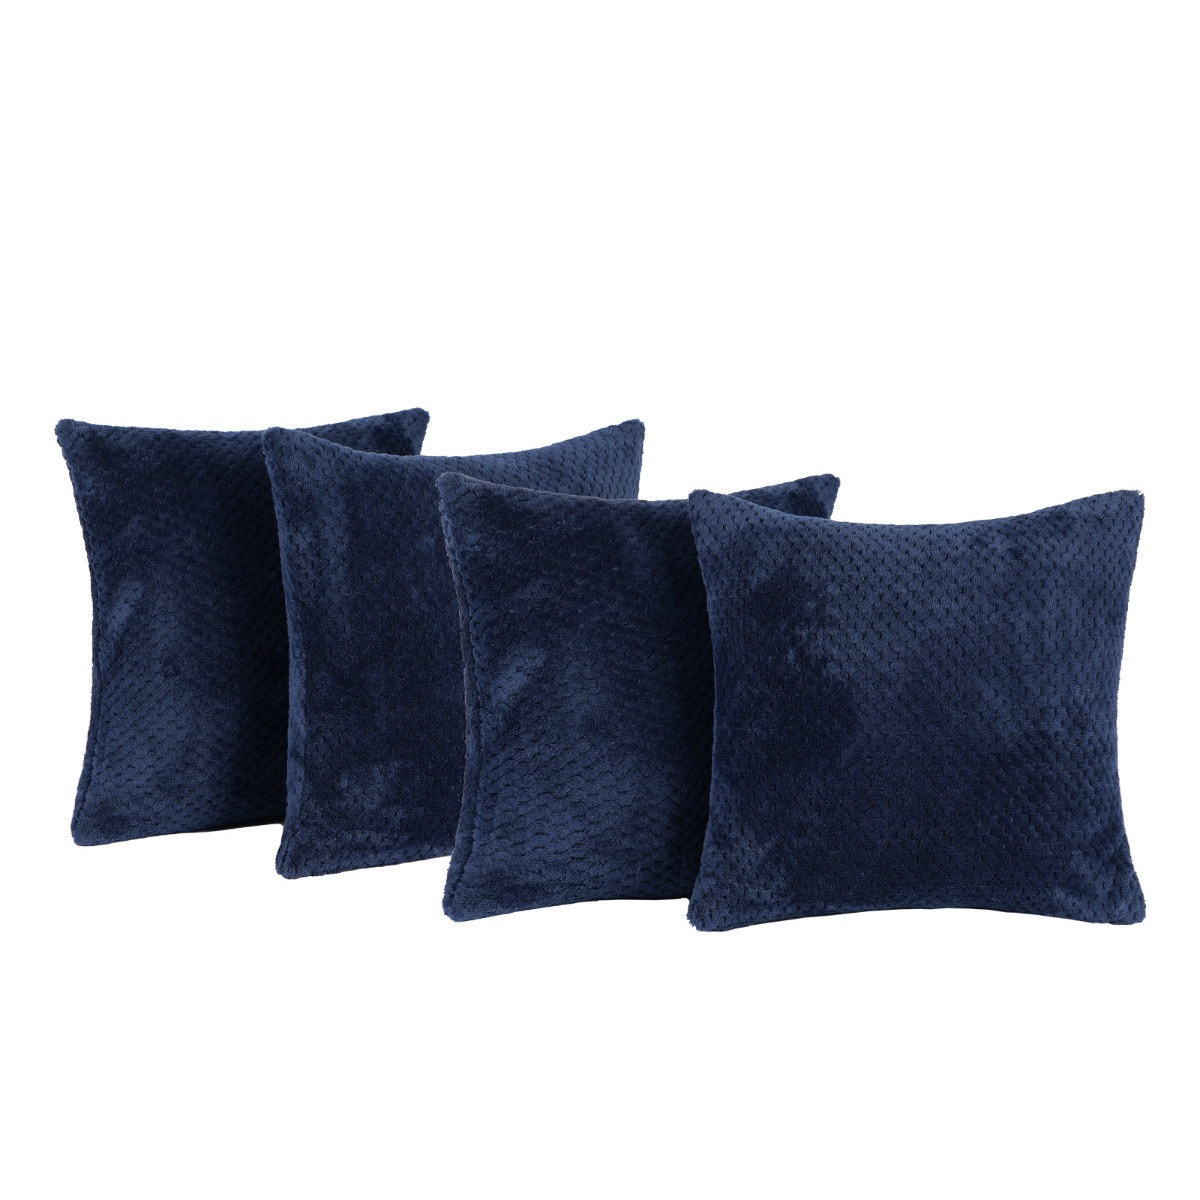 Brentfords 4 Pack Waffle Fleece Cushion Covers, Navy - 45 x 45cm>